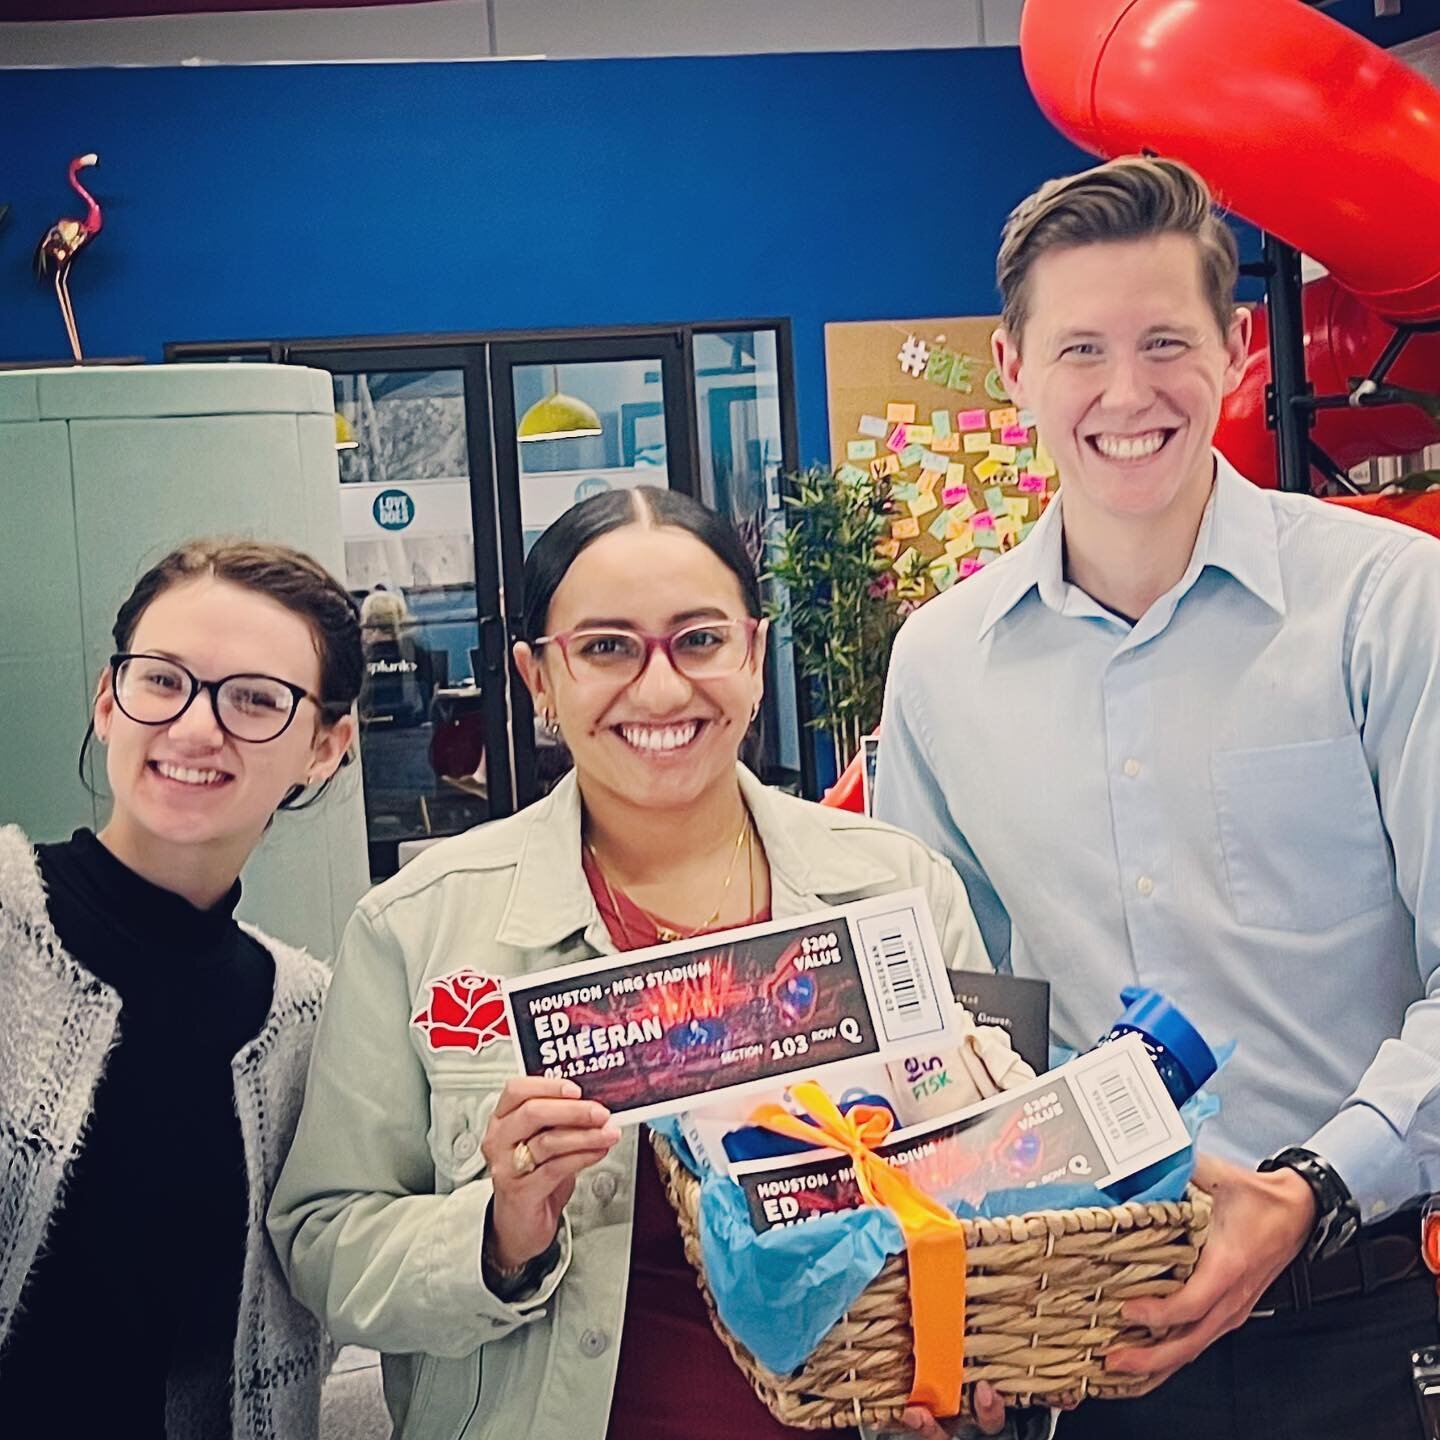 Congrats to our 2 &lsquo;Small Business Week&rsquo; winners of some amazing swag bags AND pretty spectacular seats to the upcoming #edsheeran concert at #nrgstadium in #houston. Enjoy the show 🎉🥳